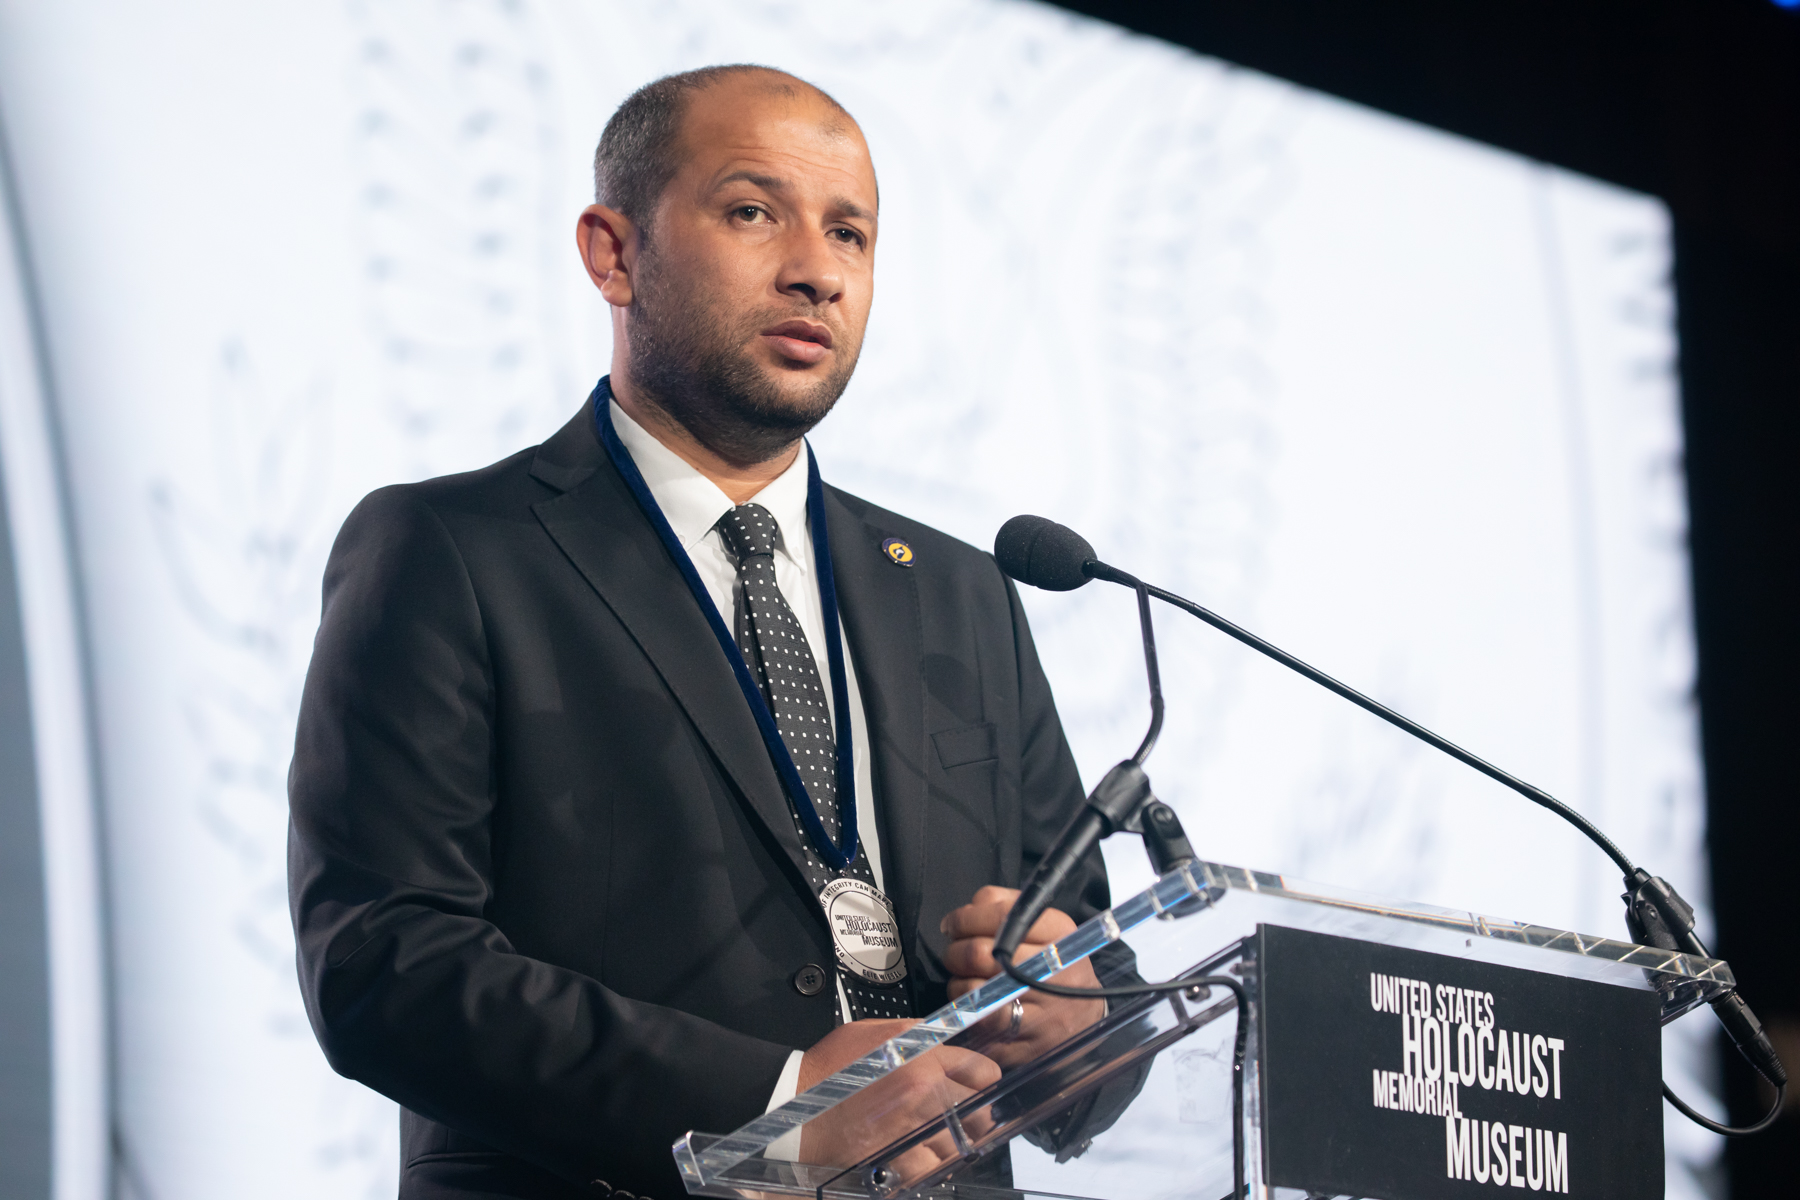 Raed Saleh, the lead organizer of the White Helmets, accepts the 2019 Elie Wiesel Award, the United States Holocaust Memorial Museum’s highest honor, on behalf of the Syria Civil Defence. To date, 261 members of the White Helmets have been killed while saving more than 115,000 lives. Credit: U.S. Holocaust Memorial Museum